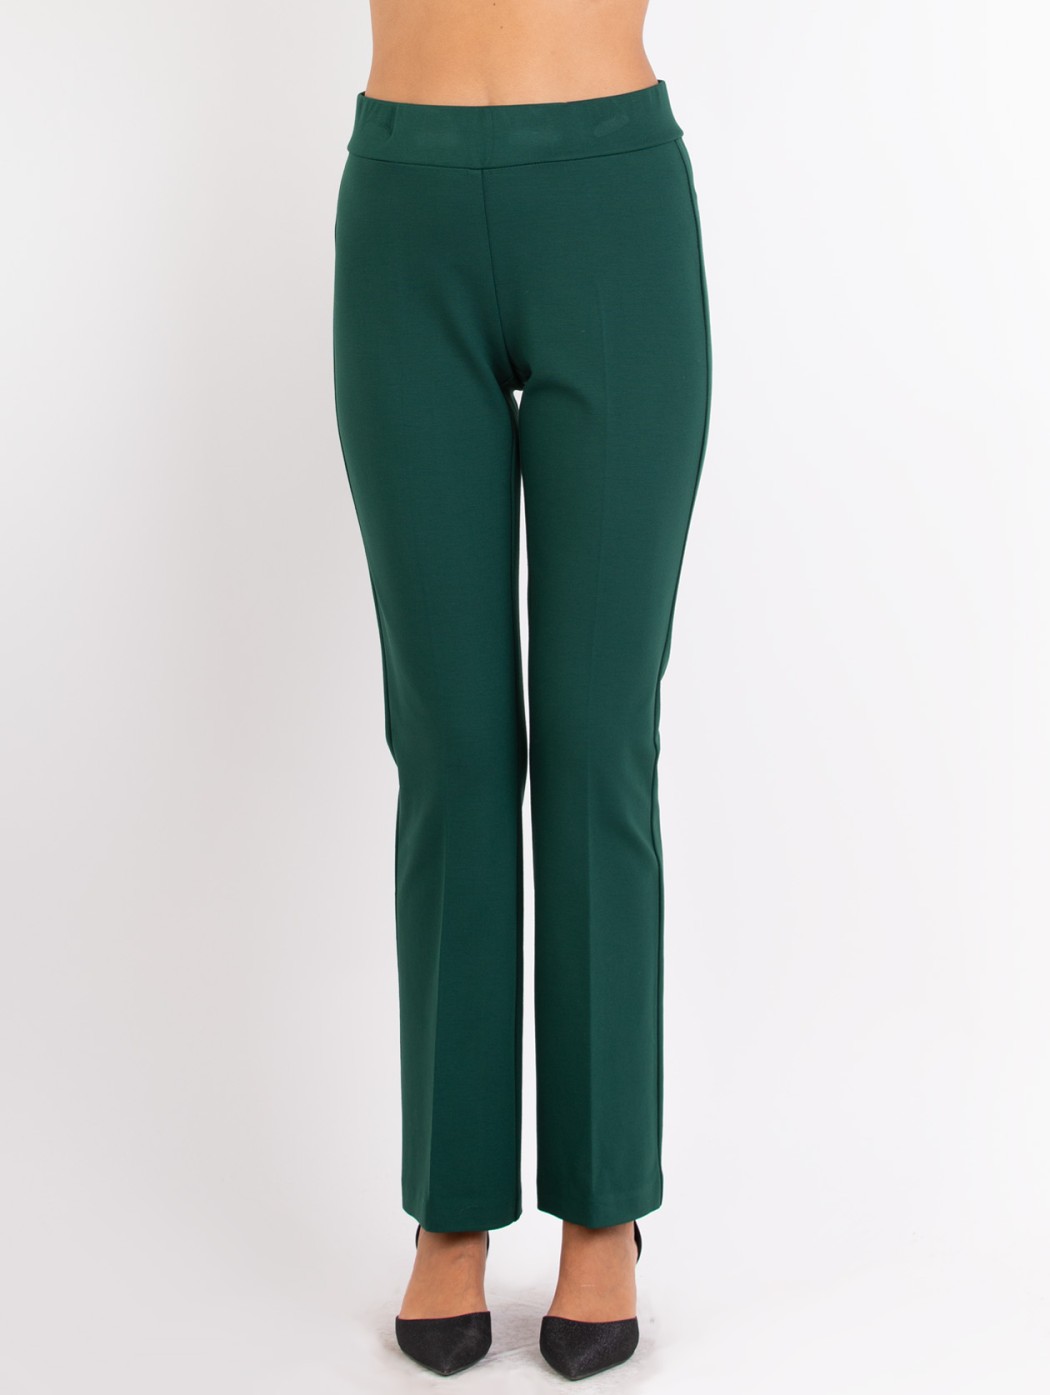 I'm a tall girl. Here's where I find the perfect pants.'